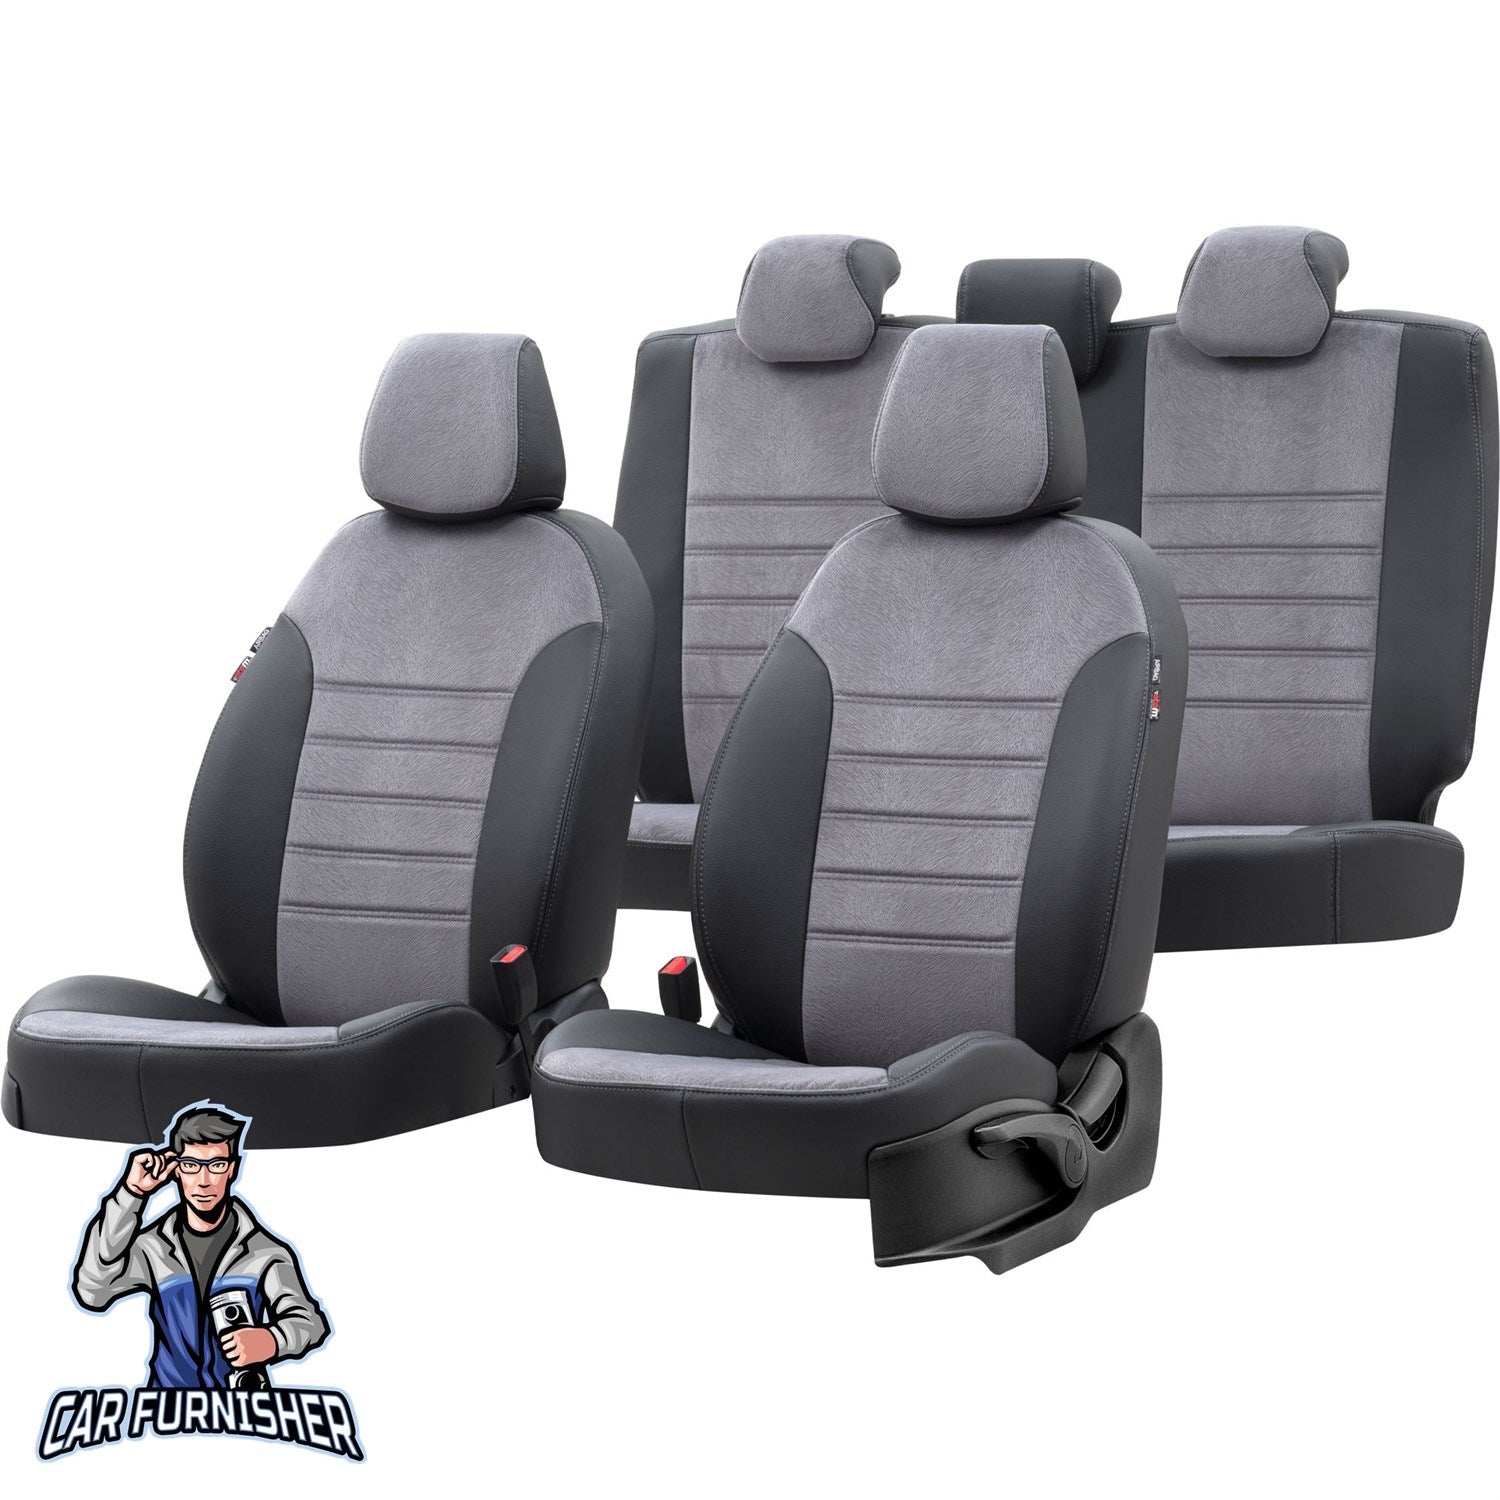 Landrover Freelander Car Seat Covers 1998-2012 London Design Smoked Black Leather & Foal Feather